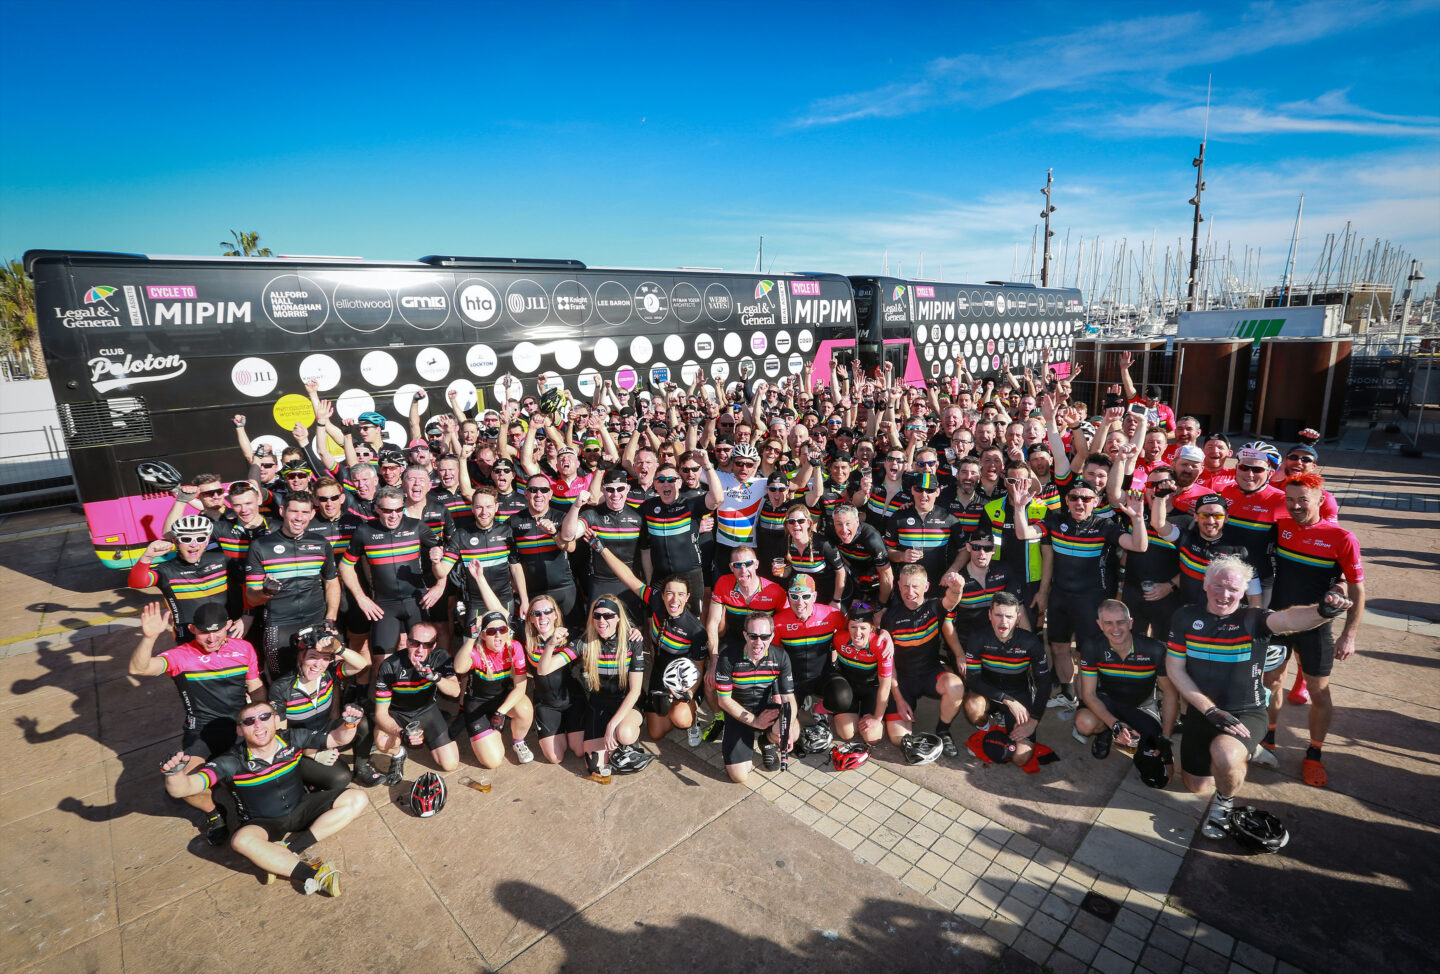 Reflecting on the Club Peloton Cycle to MIPIM 2018